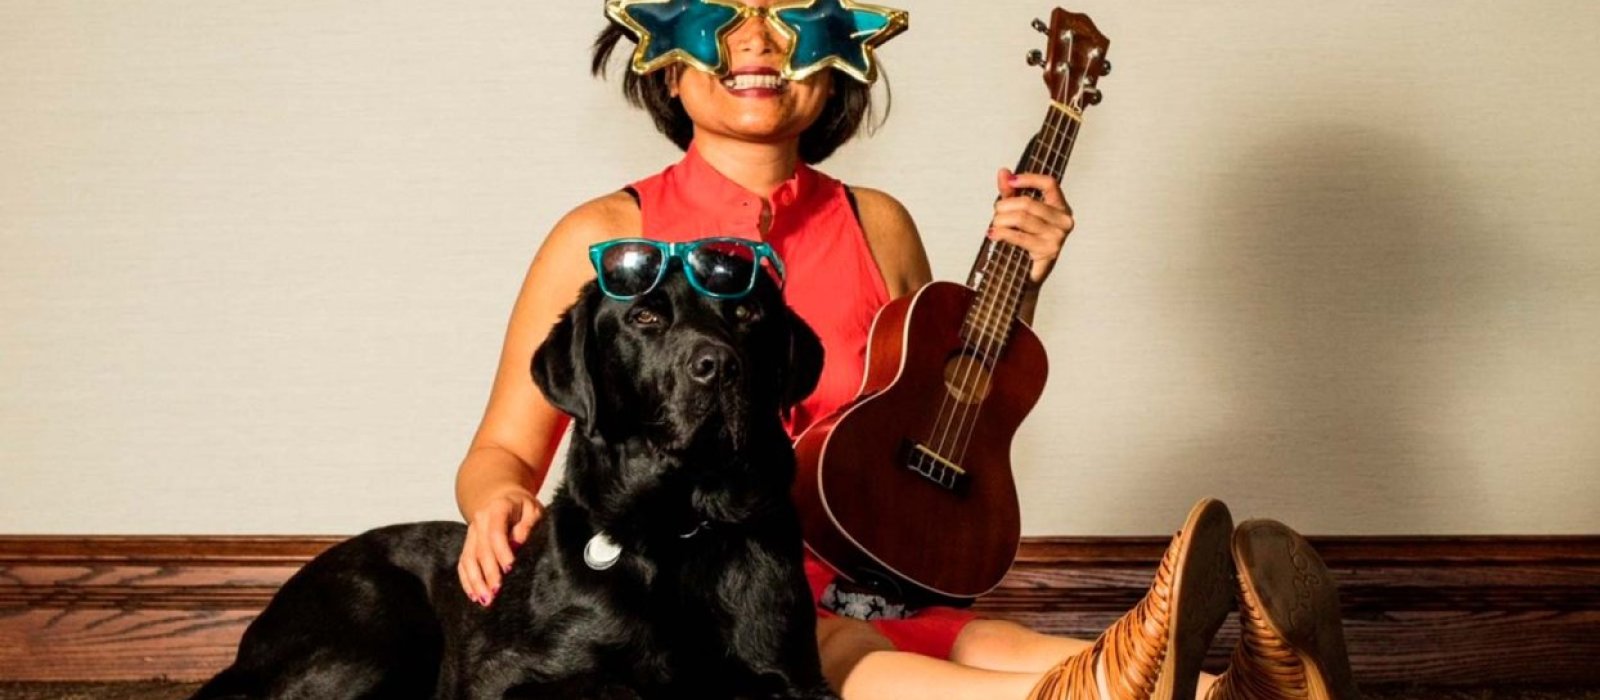 Photograph of Vivian Chong sitting on the floor smiling, wearing big star-shaped sunglasses and holding a ukulele. Beside her is guide dog Catcher, lying regally at her side, with star-shaped sunglasses on his head.